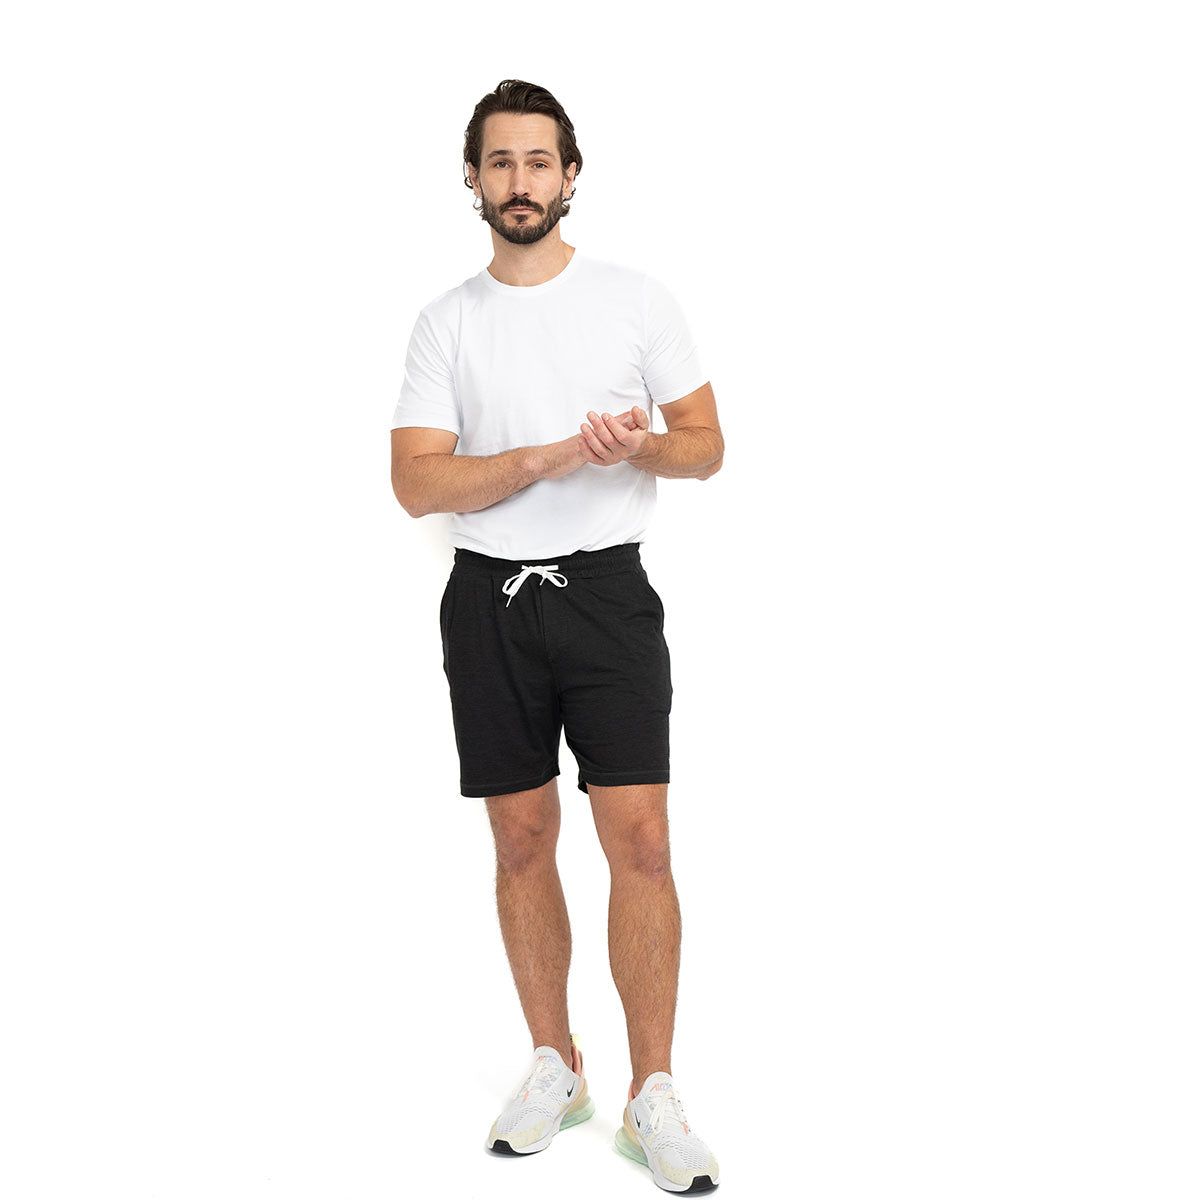 Conquest Athletic Shorts for Men